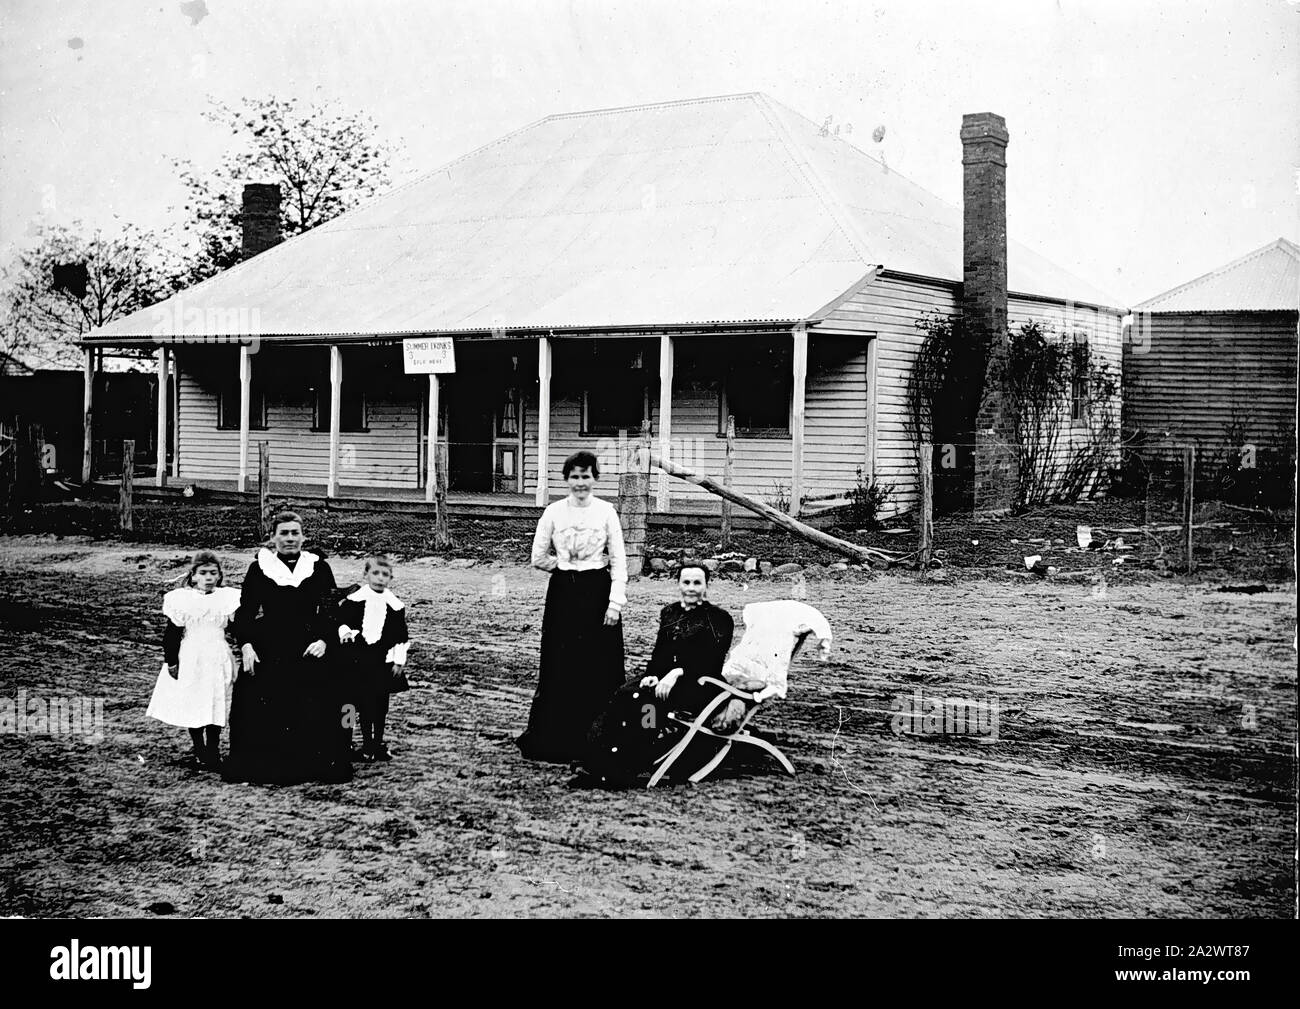 Negative - Knowsley District, Victoria, 1900, The White family in front of 'Cosmo' homestead. The homestead is weatherboard with brick chimneys and has a steep pitched roof Stock Photo